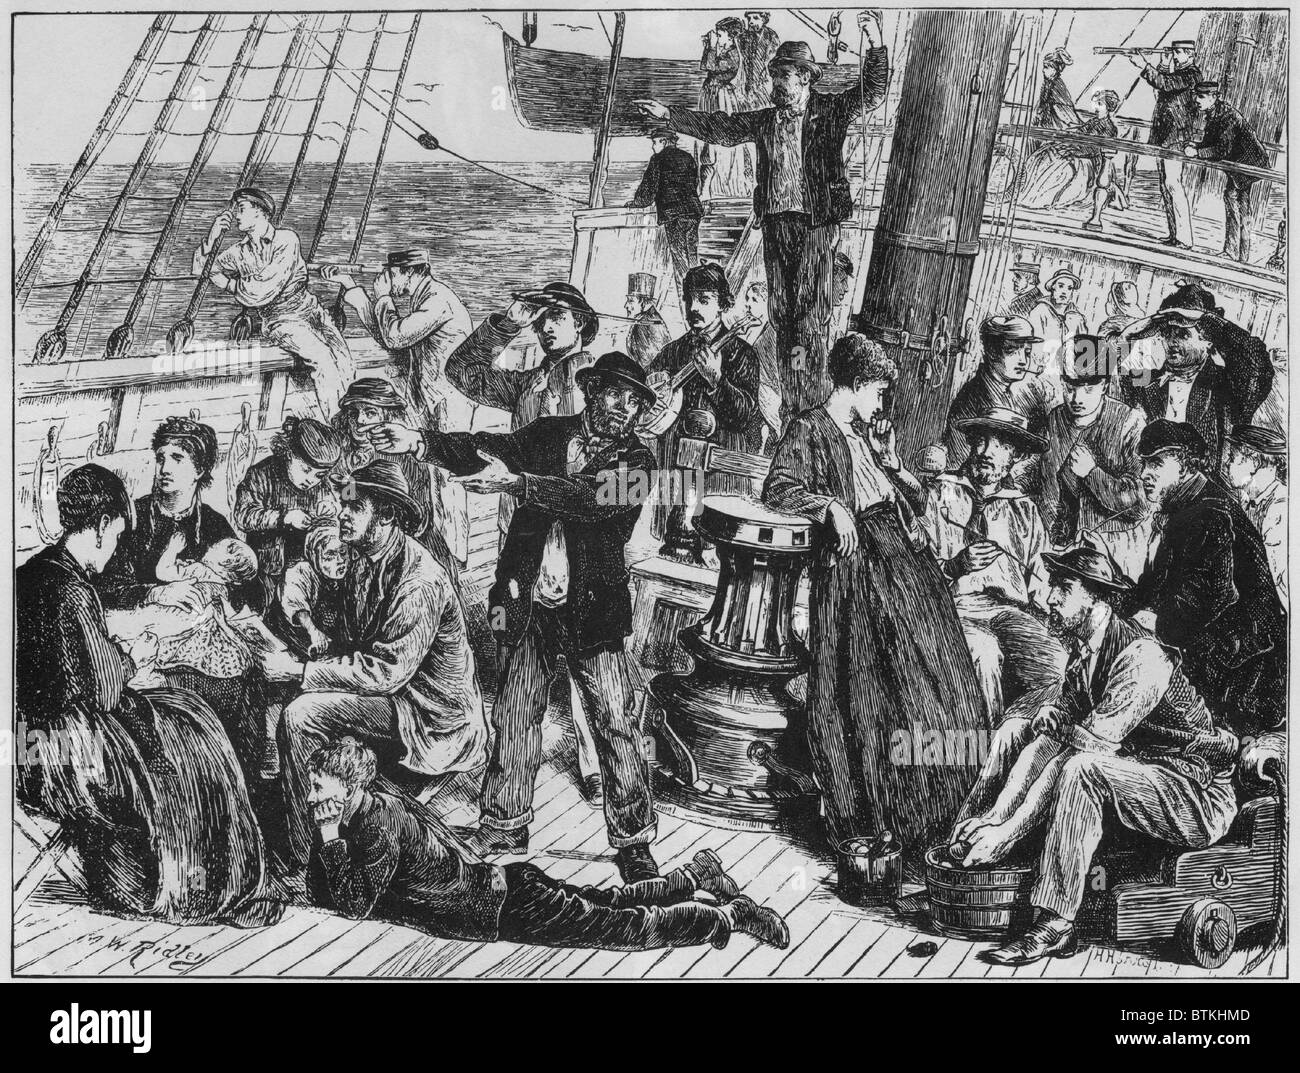 Emigrants on the open deck of an immigrant steamship to Canada, site land after at least two weeks at sea. The ship, GANGES, carried 761 people who paid 3 British pounds for their passage. People on deck engage in play, music, talk, smoking and looking through telescopes. April-May, 1871. Stock Photo